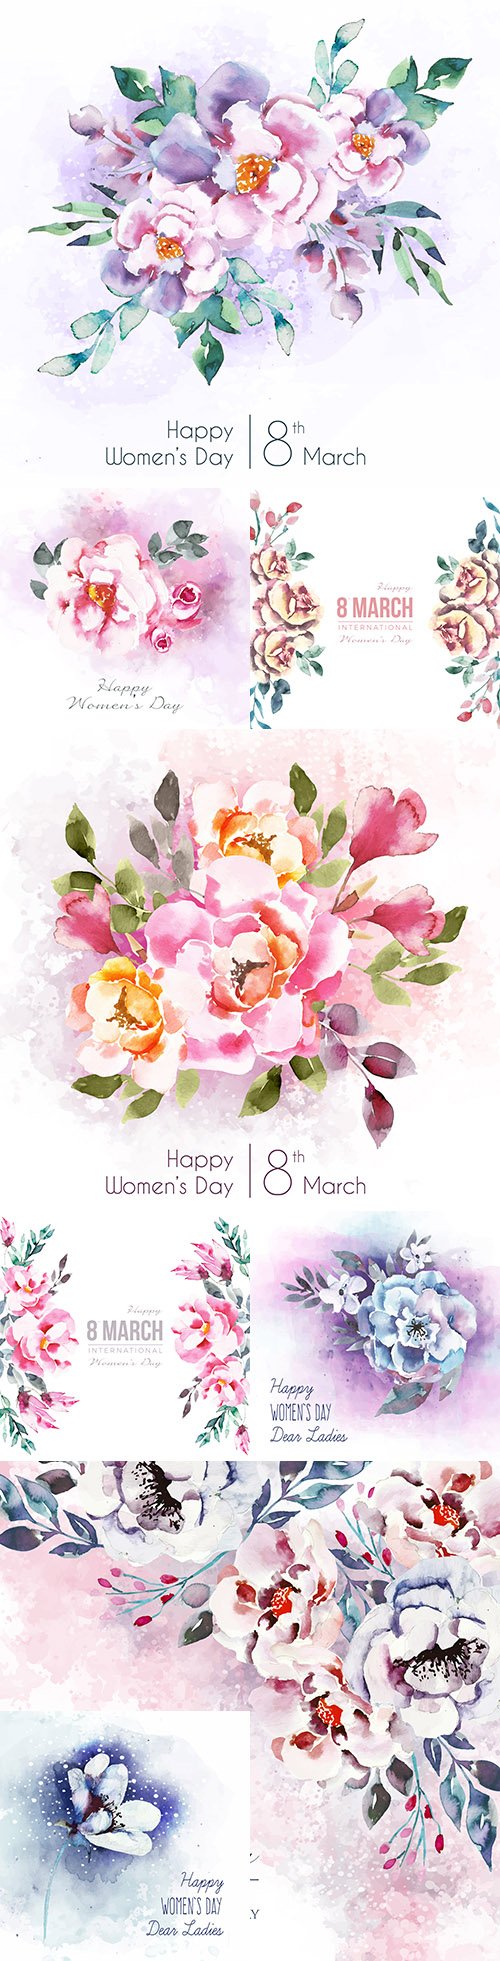 Women 's Day inscription with beautiful watercolour flowers